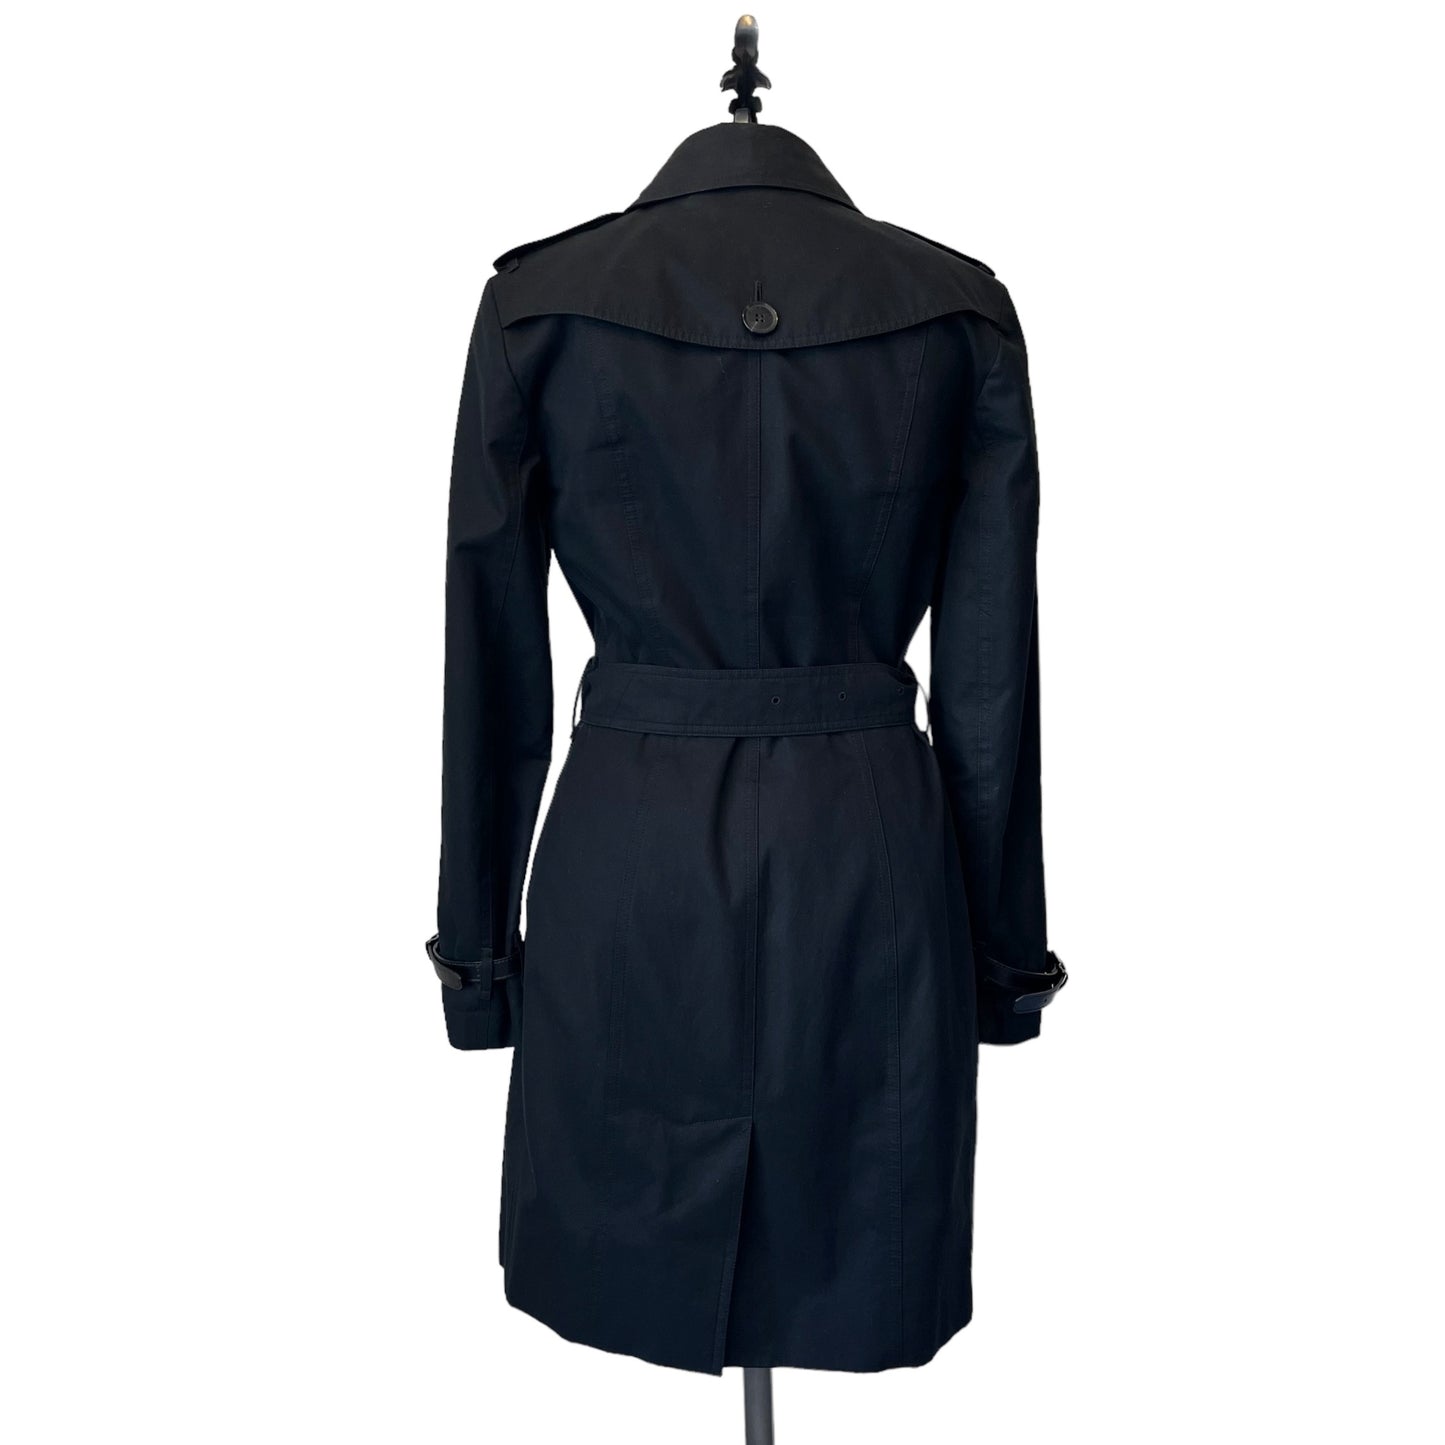 Burberry Trench - Size 4